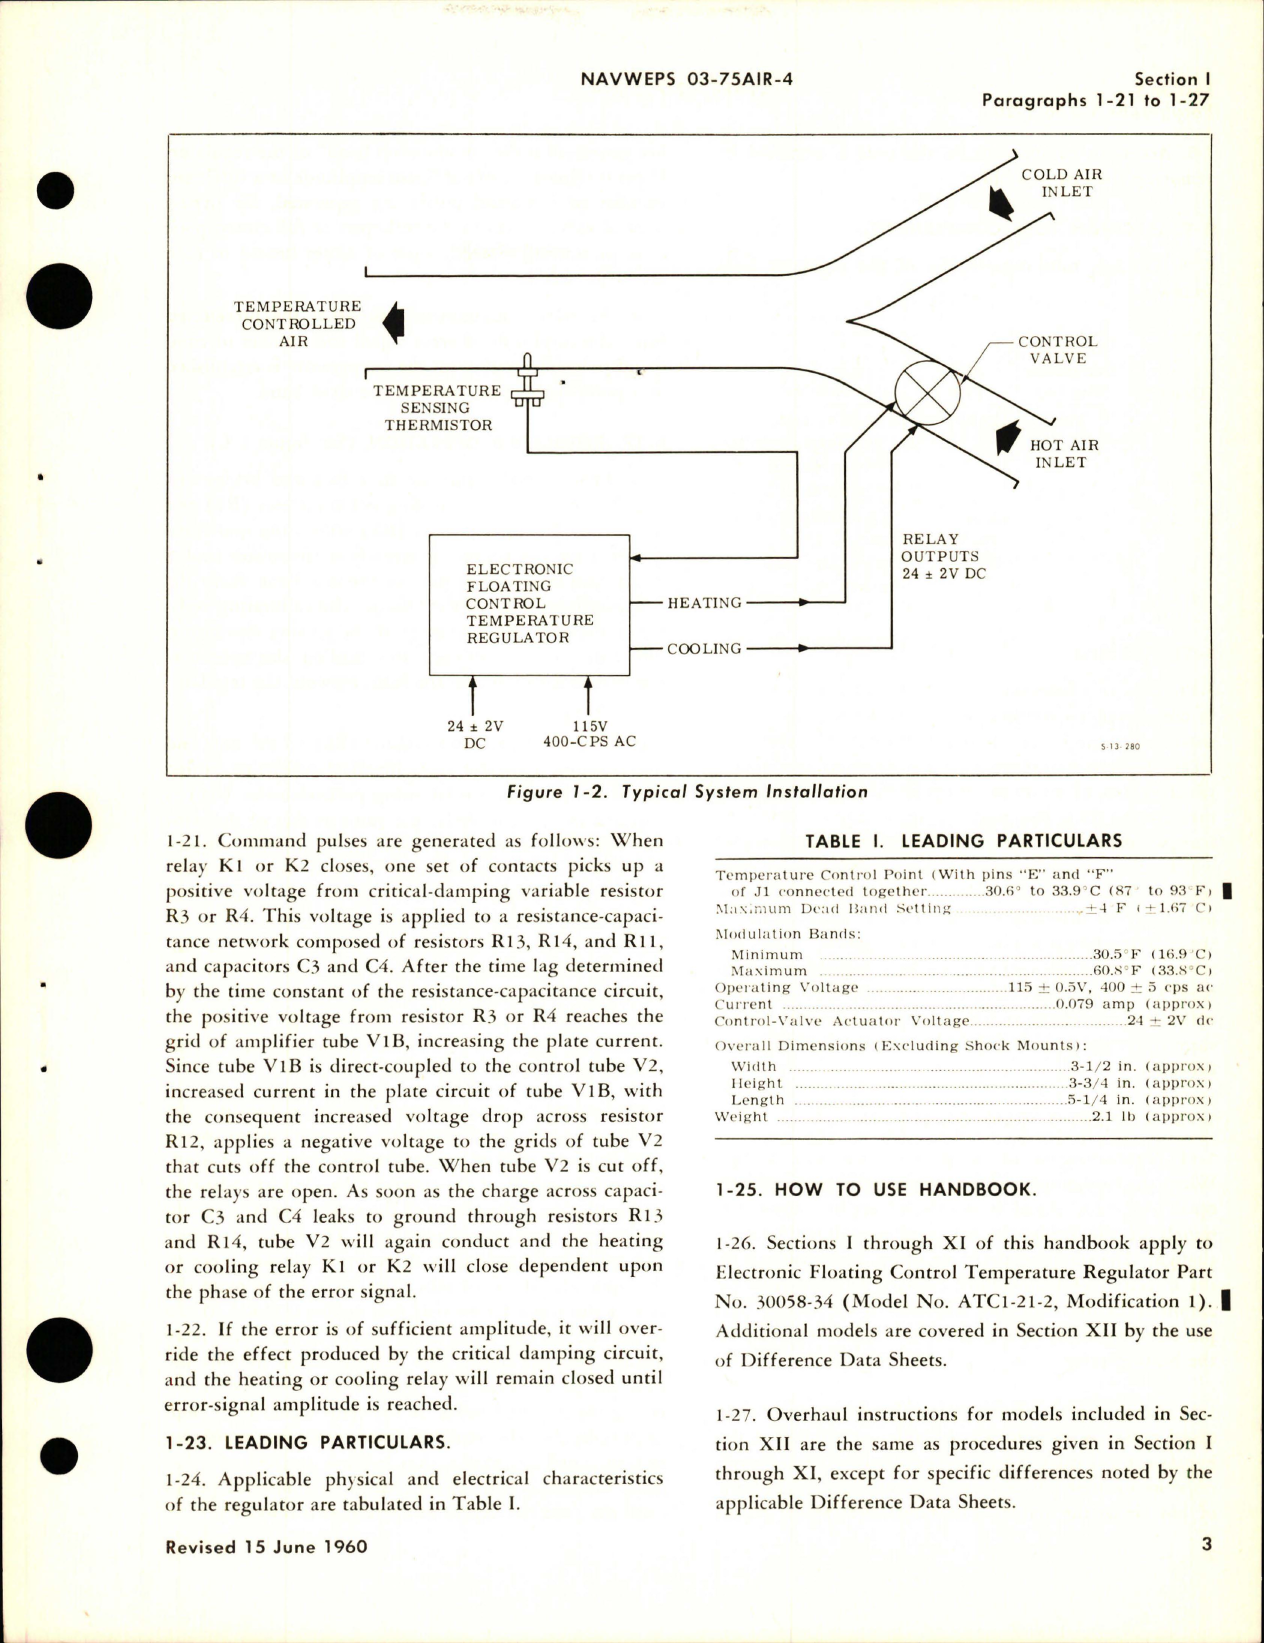 Sample page 5 from AirCorps Library document: Overhaul Instructions for Electronic Floating Control Temperature Regulator - Part 30058-34